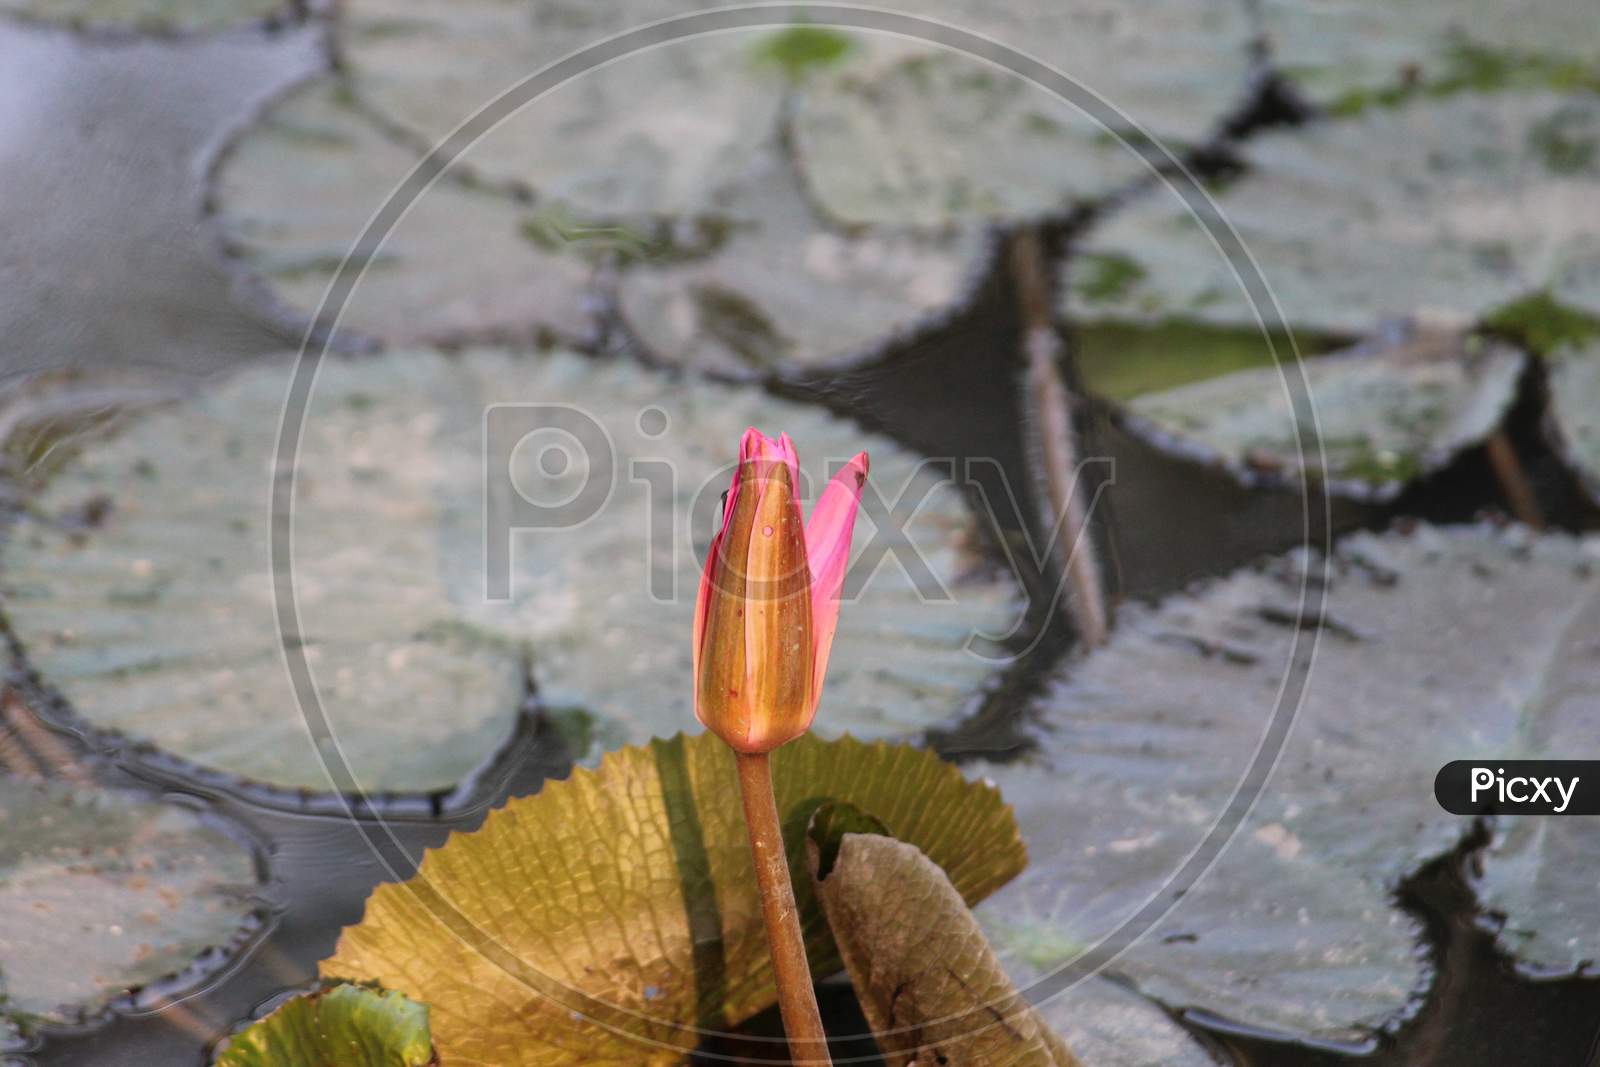 Lotus bud blooming on still water with it's green leaf, looking beautiful on a bright day.